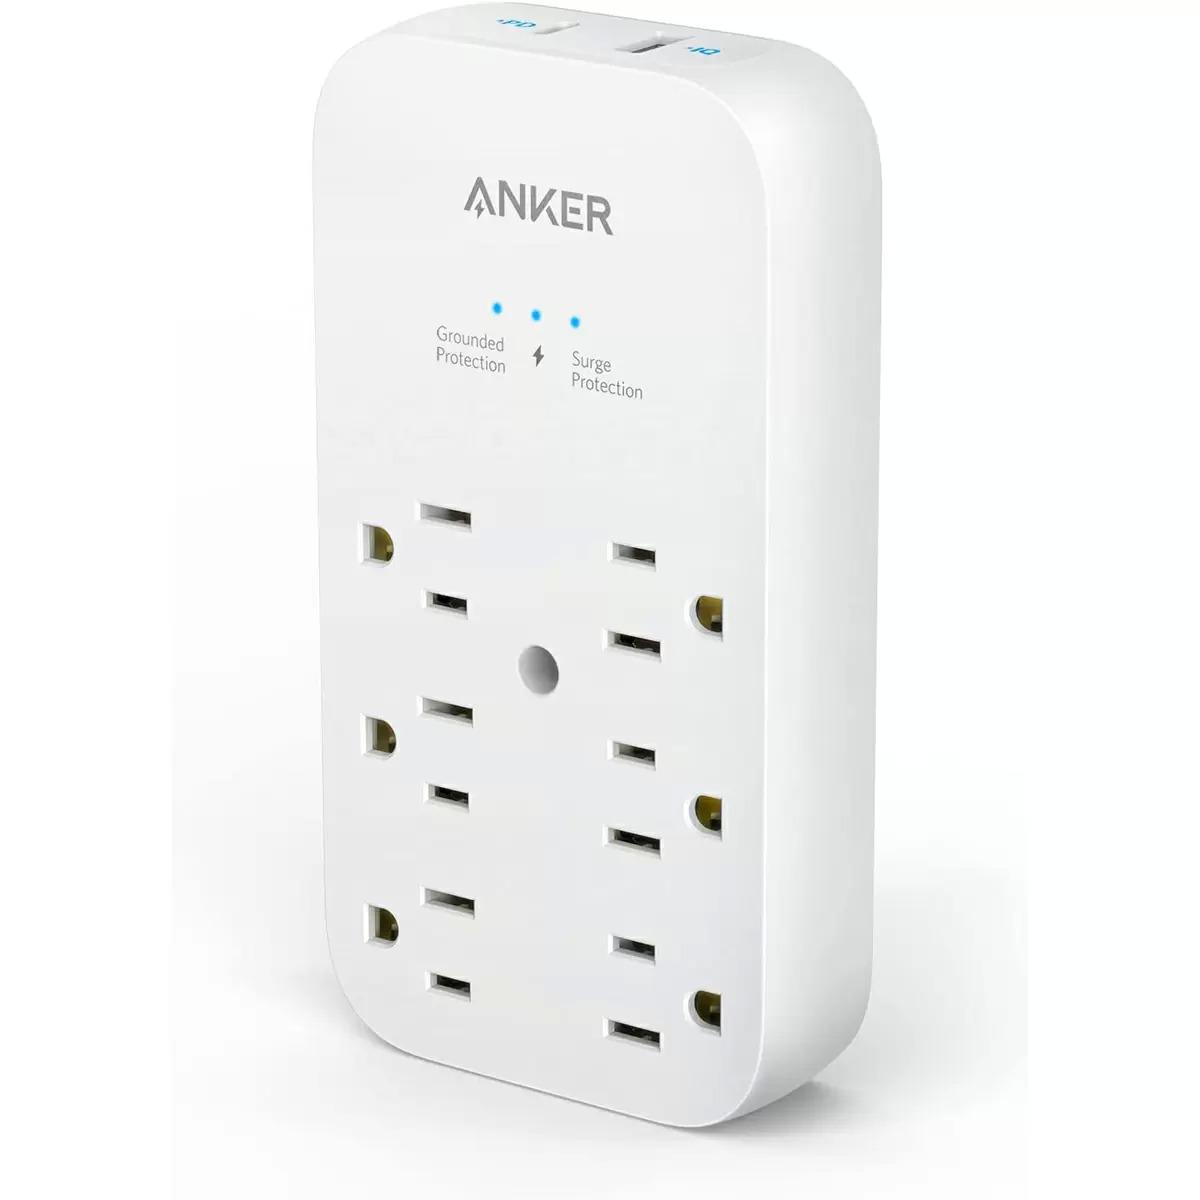 Anker 6-Outlet and 2 USB Ports Wall Charger with 20W USB-C Power Delivery for $15.99